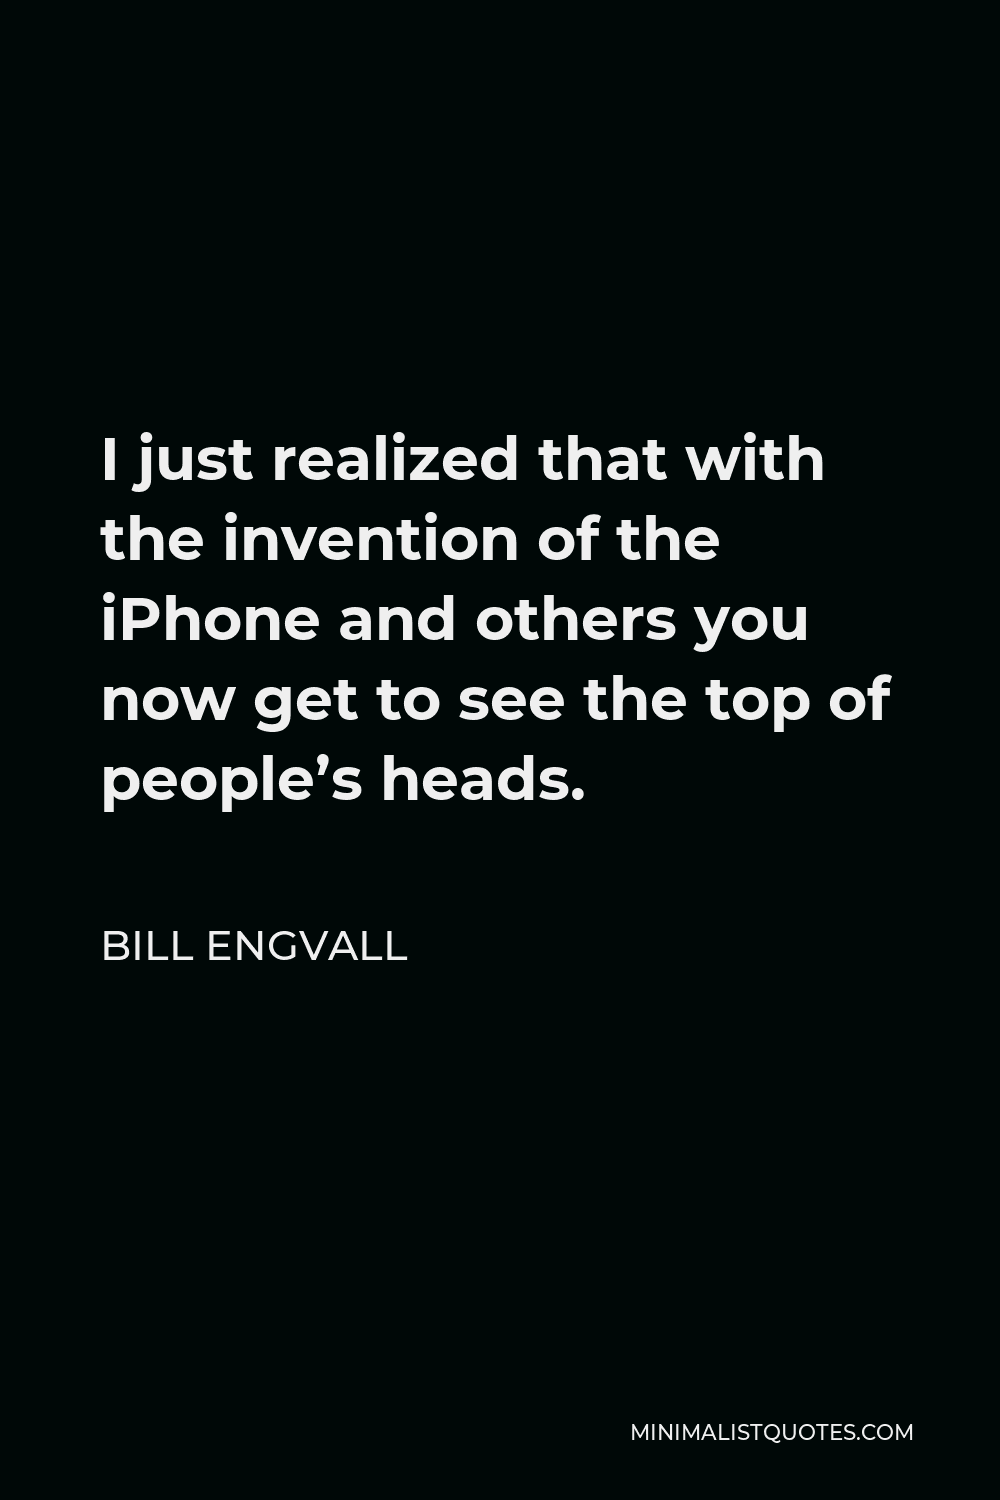 Bill Engvall Quote - I just realized that with the invention of the iPhone and others you now get to see the top of people’s heads.